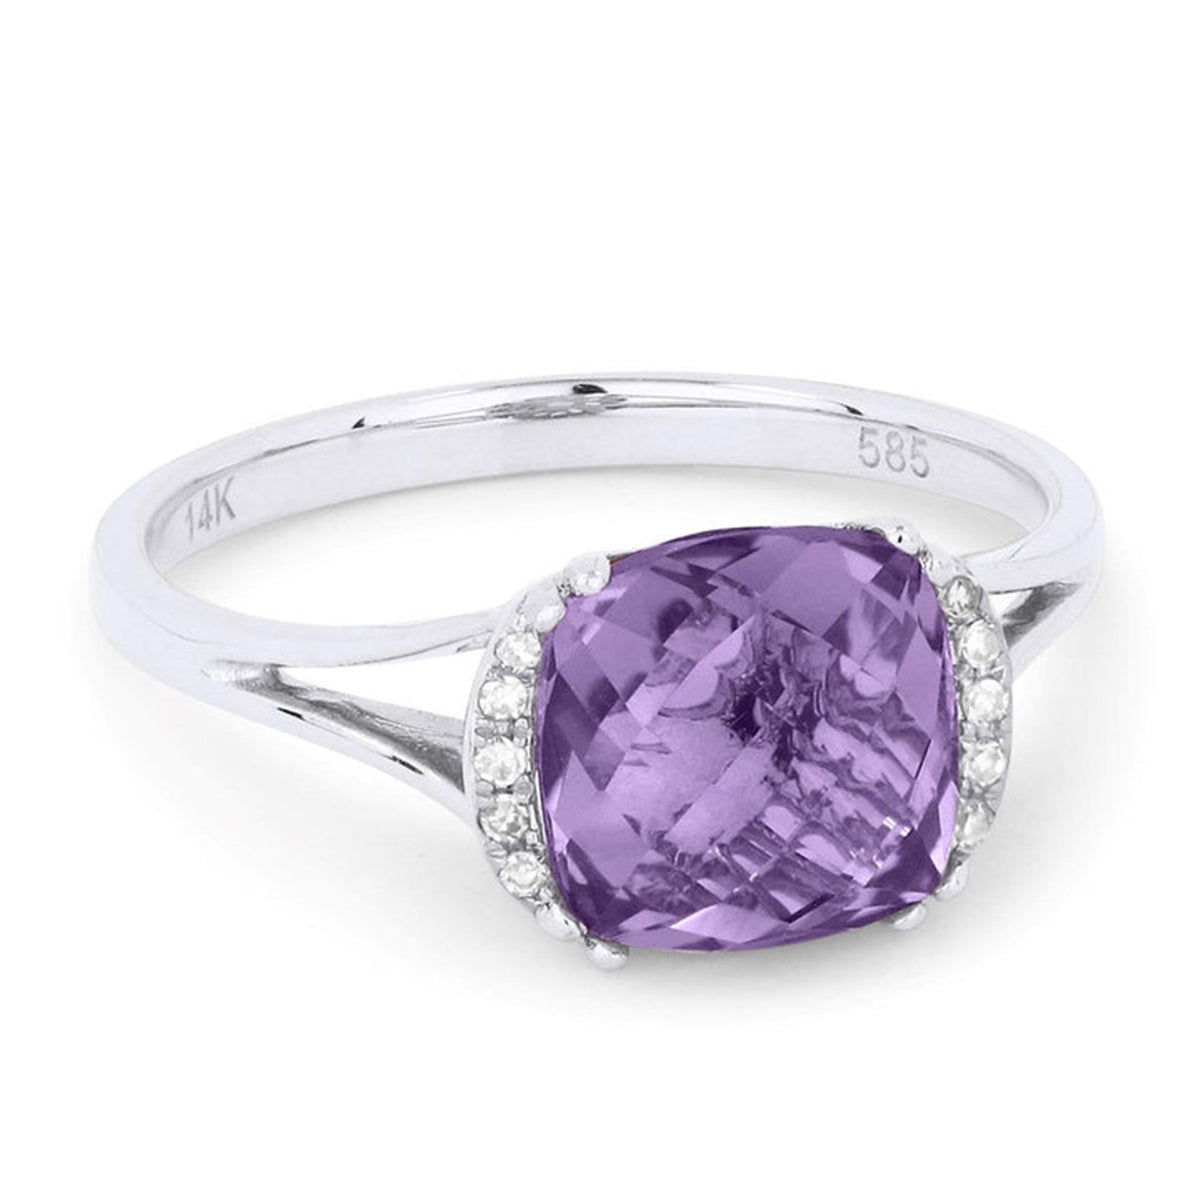 14Kt White Gold Prong Set Gemstone Ring With 2.28ct Amethyst